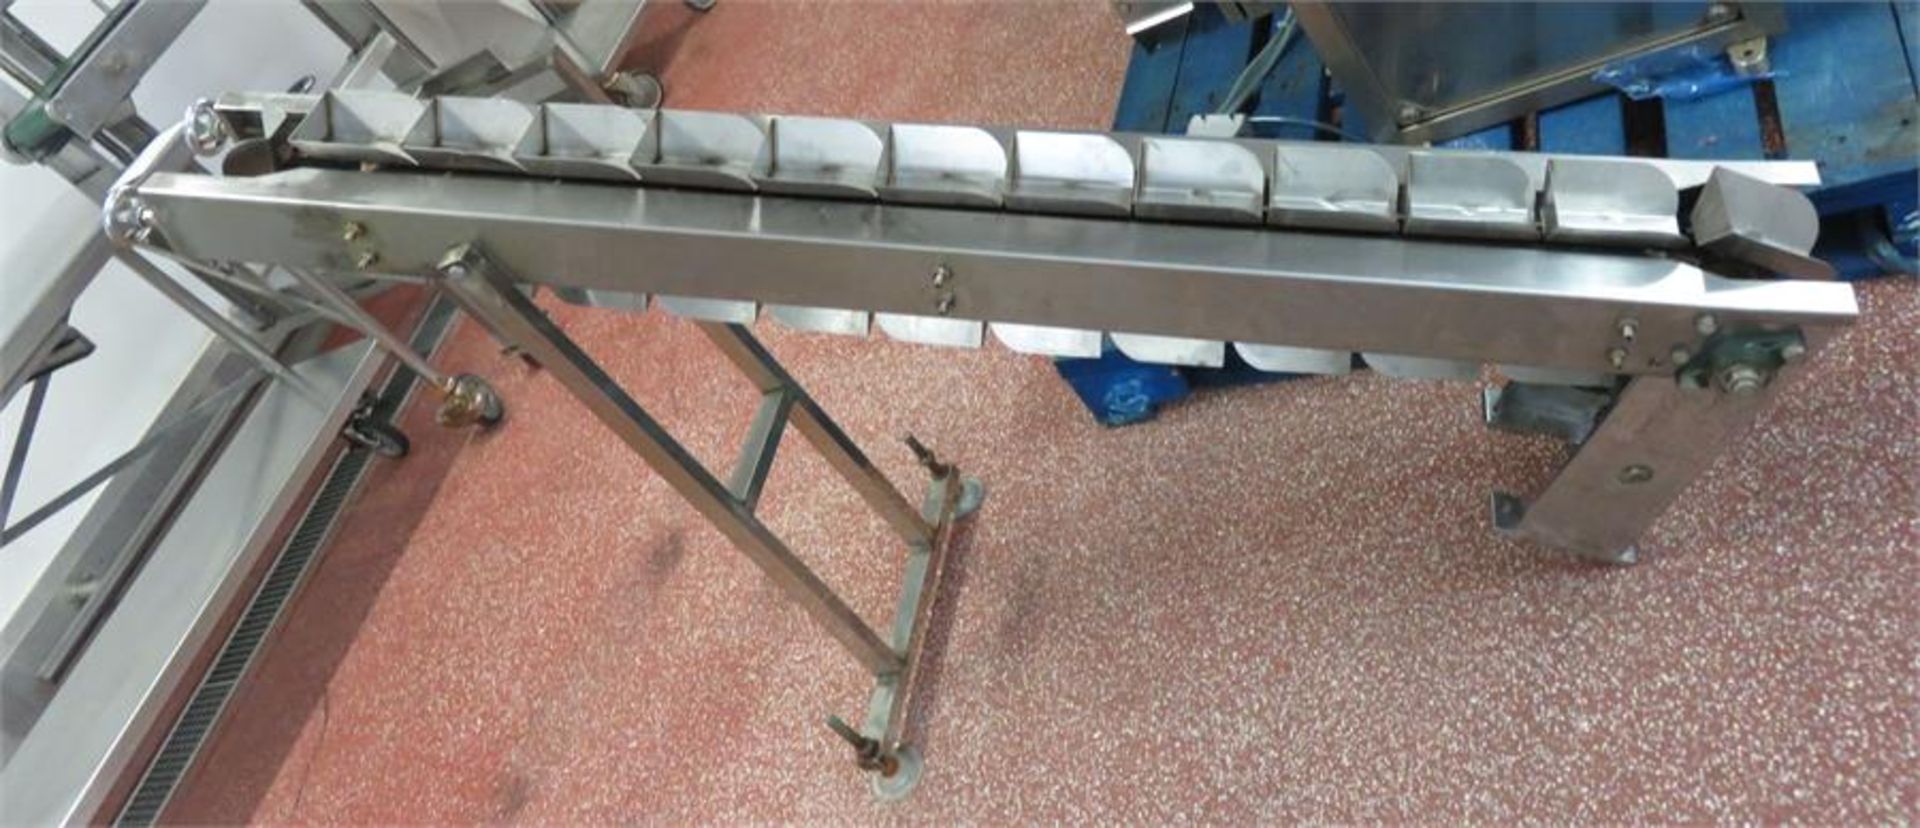 INCLINED OUTFEED CONVEYOR - Image 3 of 3